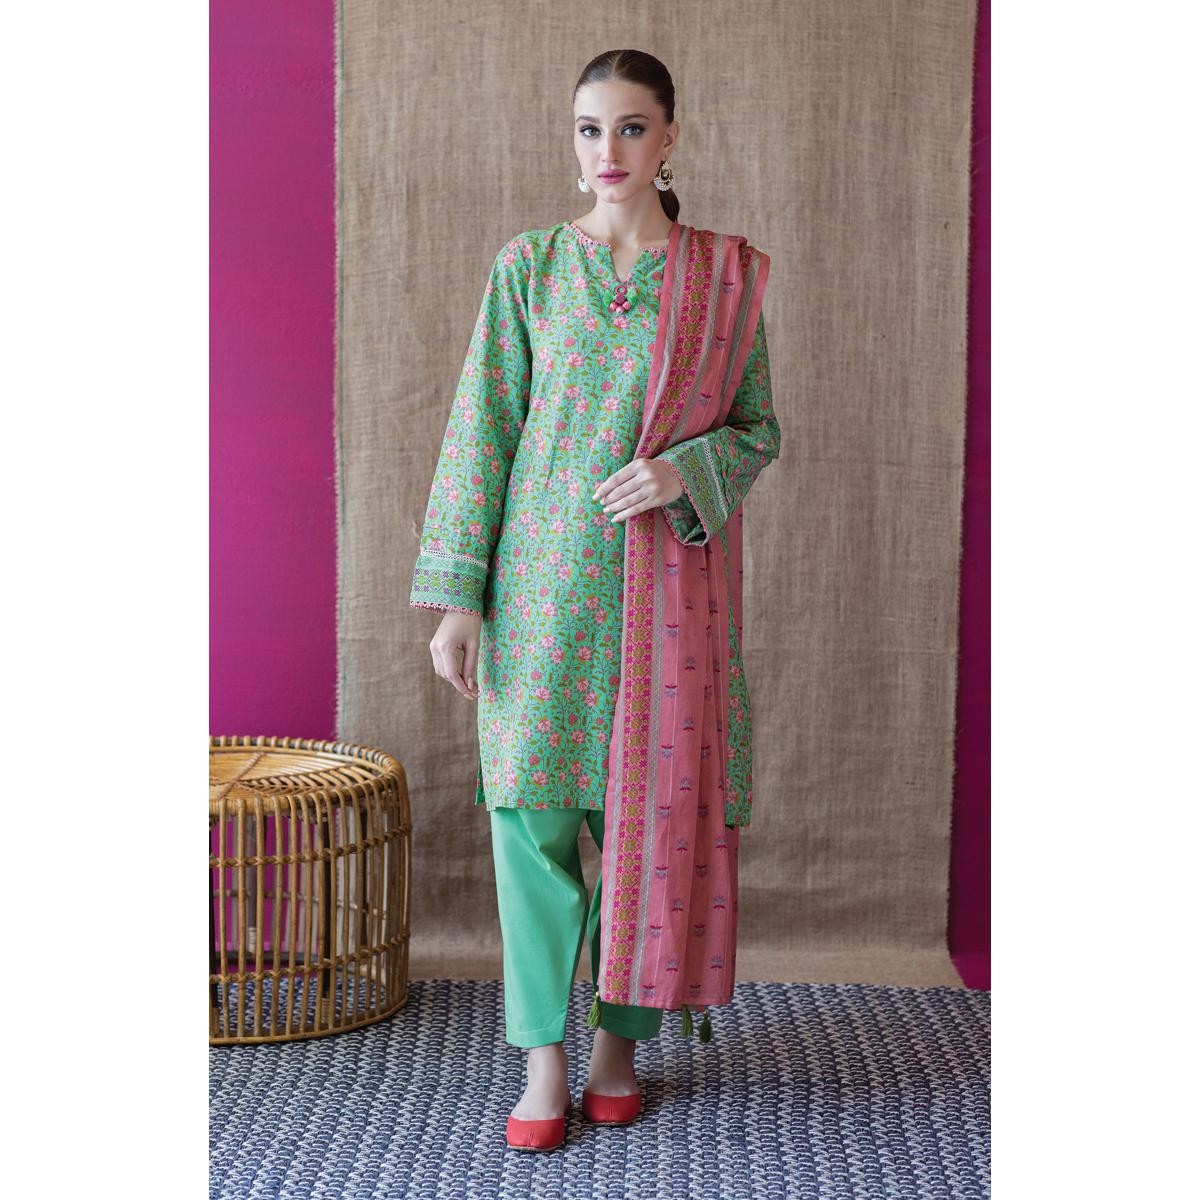 /2023/01/orient-unstitched-3-piece-suit-for-womenprinted-cambric-shirt-cambric-pant-and-lawn-dupatta-361993645_pk-1811937022-image1.jpeg